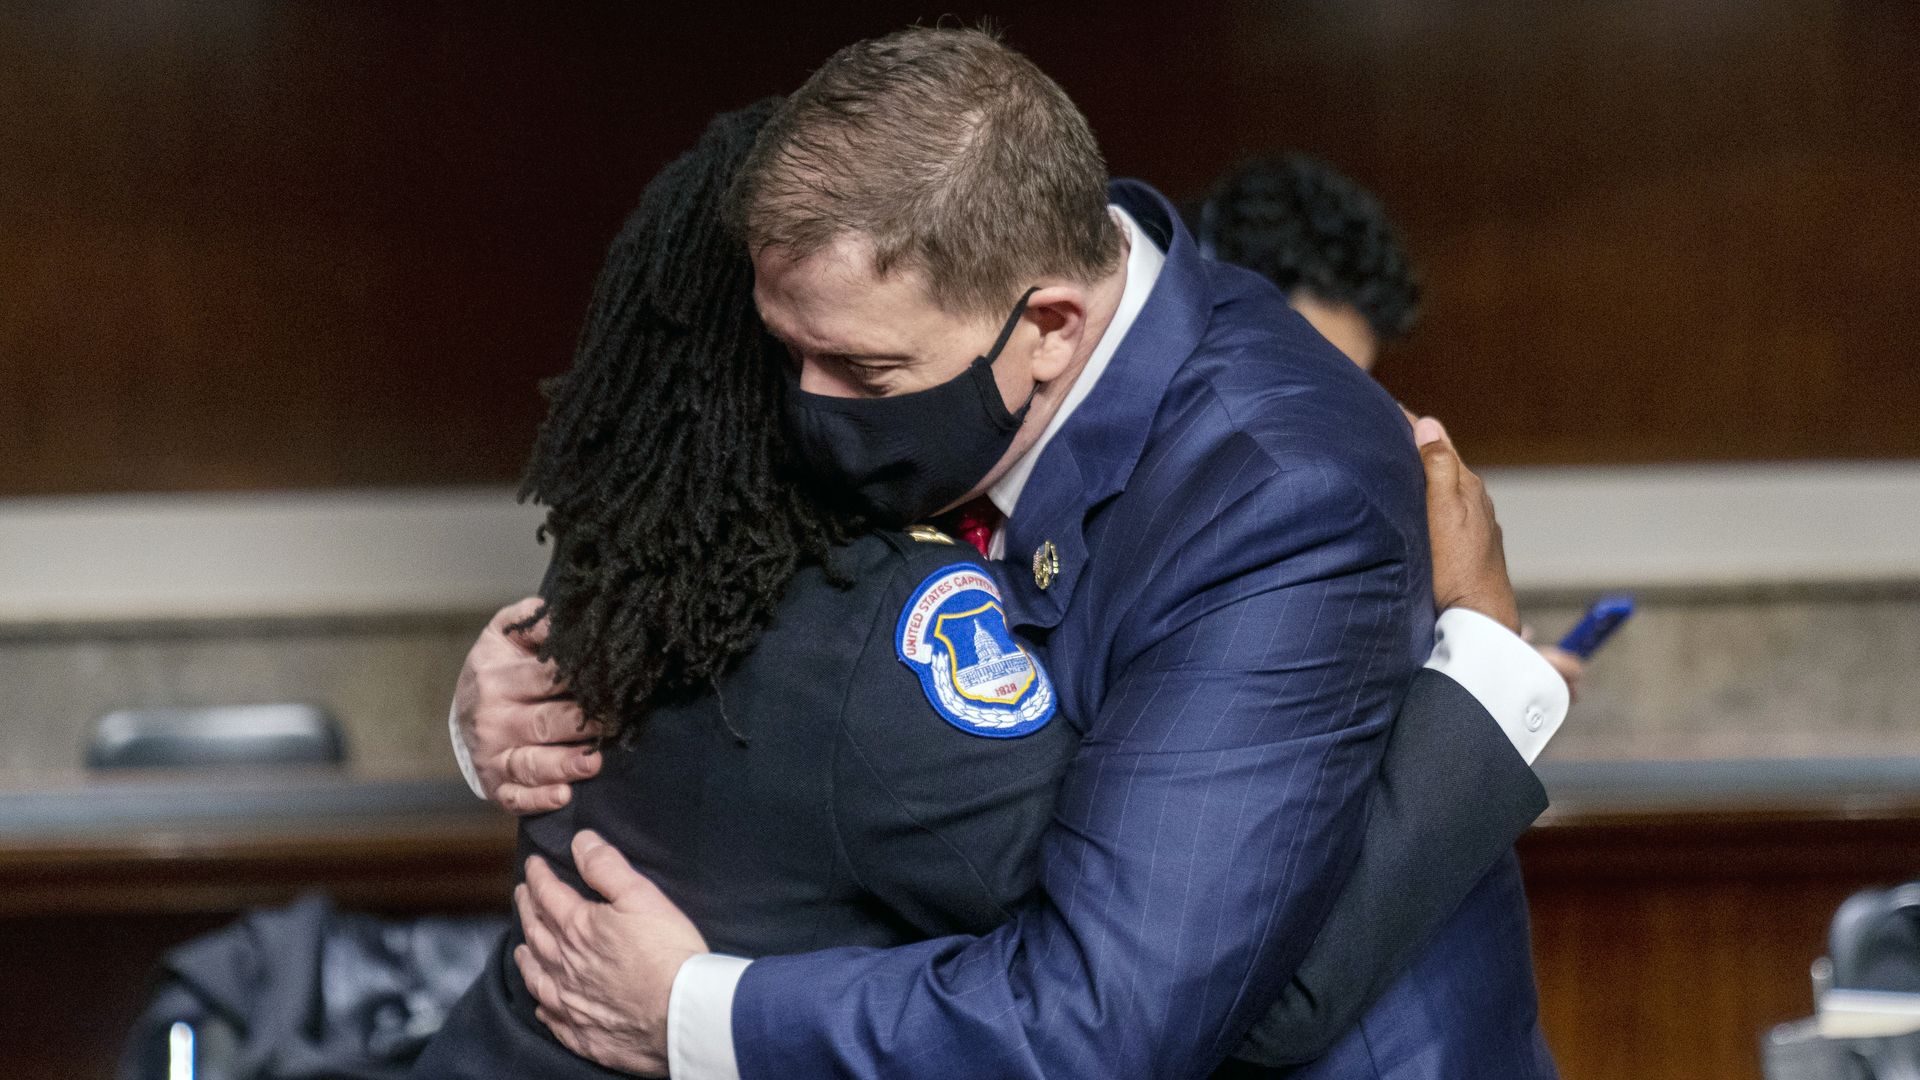 Steven Sund, former Capitol chief of police, right, hugs Carneysha Mendoza, captain of the U.S. Capitol Police Department